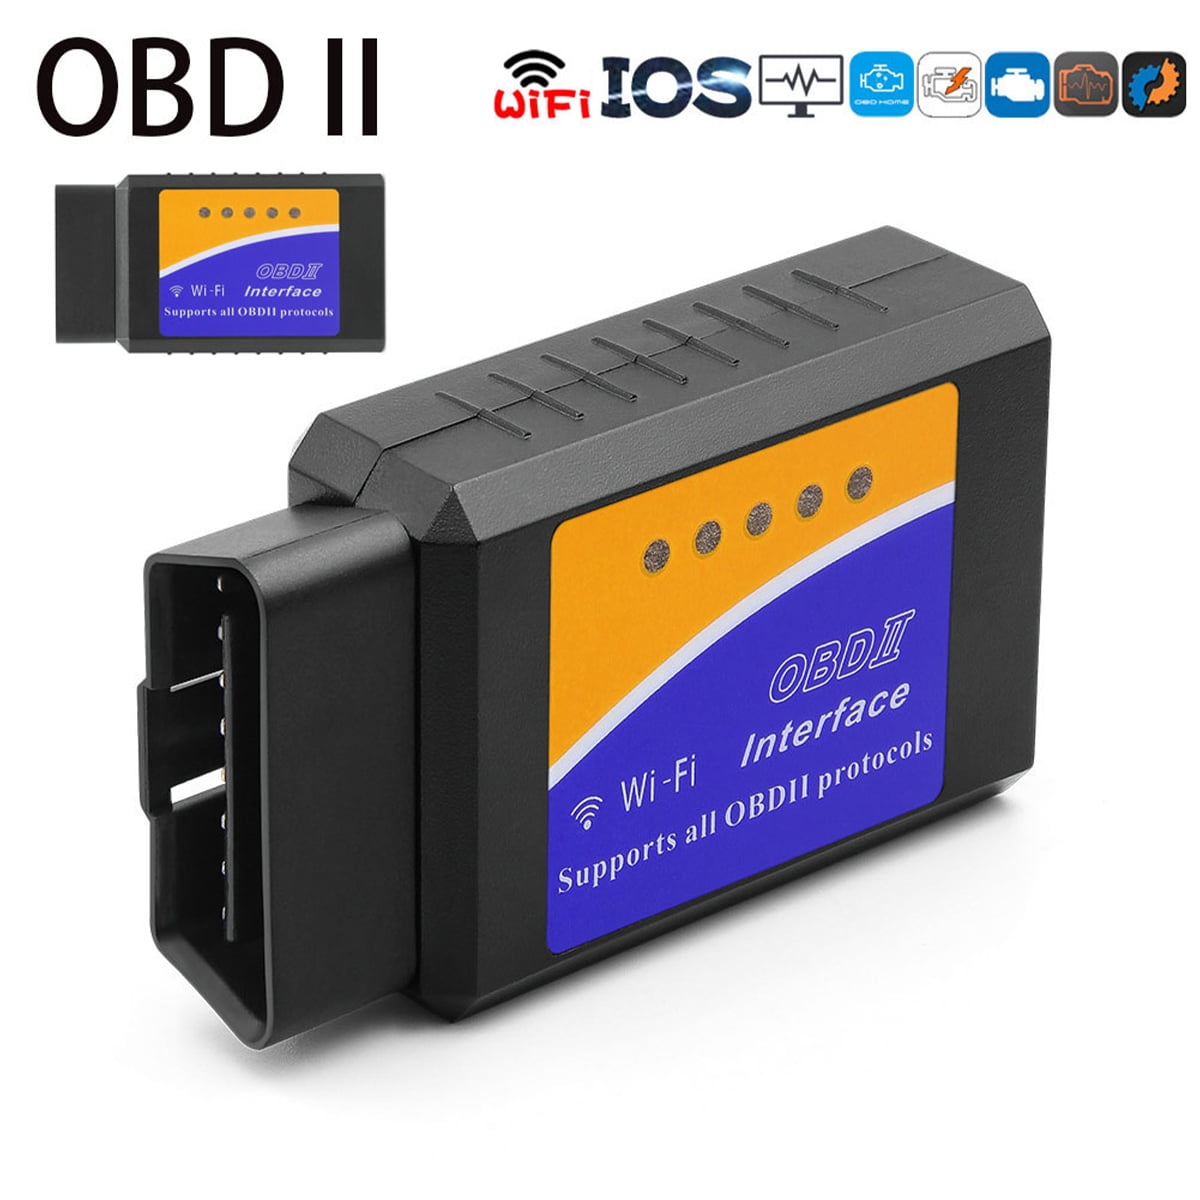 Lieonvis Products Wireless WiFi (OBDII) OBD2 Code Reader & Scan Tool  Wireless Check Engine Light Diagnostic Scan Tool for Cars & Trucks for  Android/Windows/iOS 